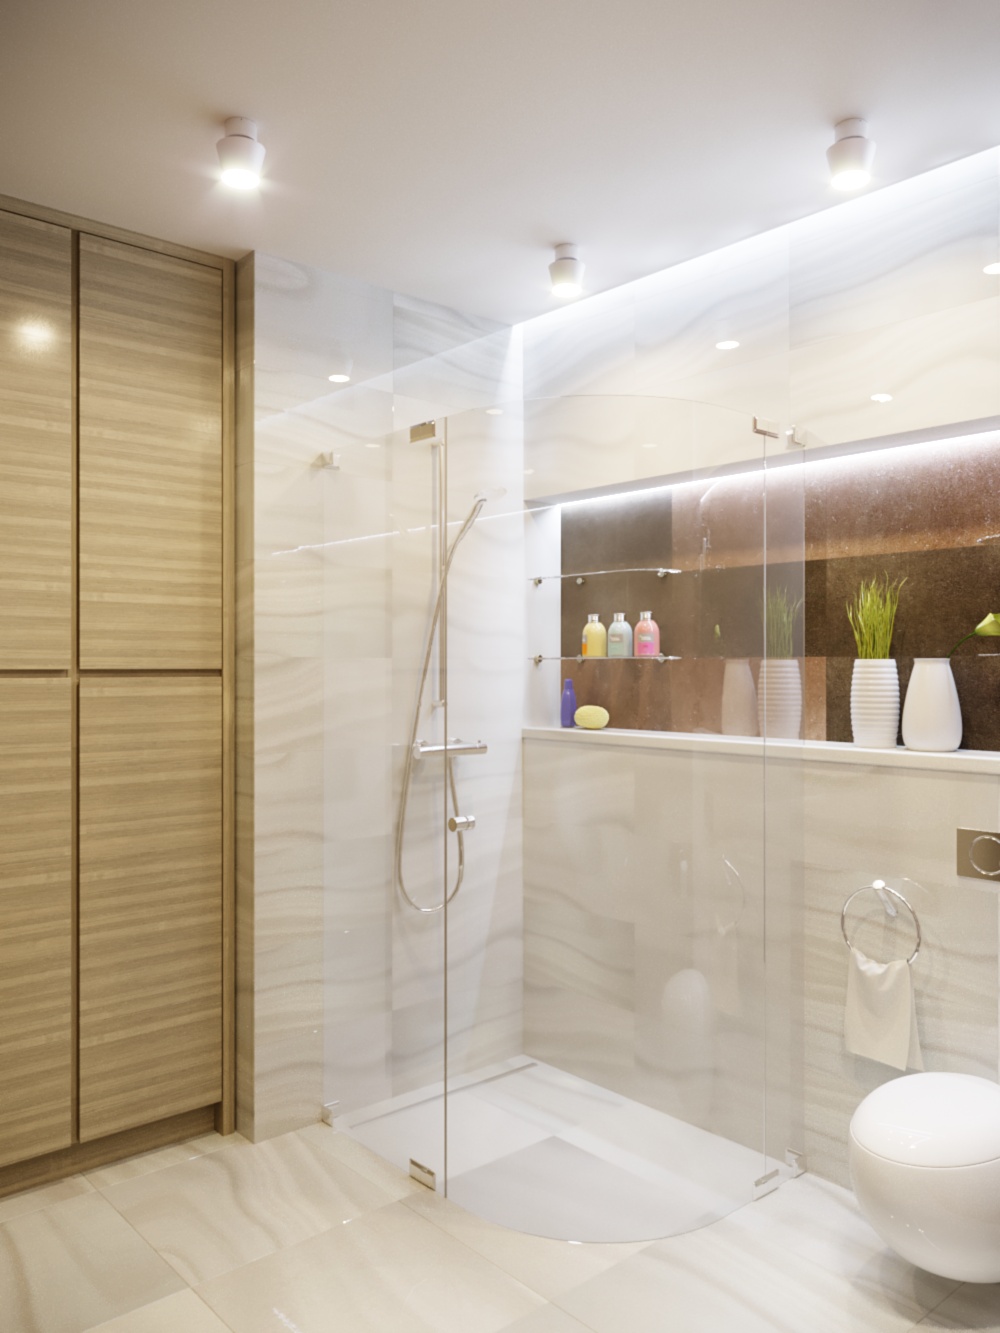 Shower and dressing room in 3d max corona render image